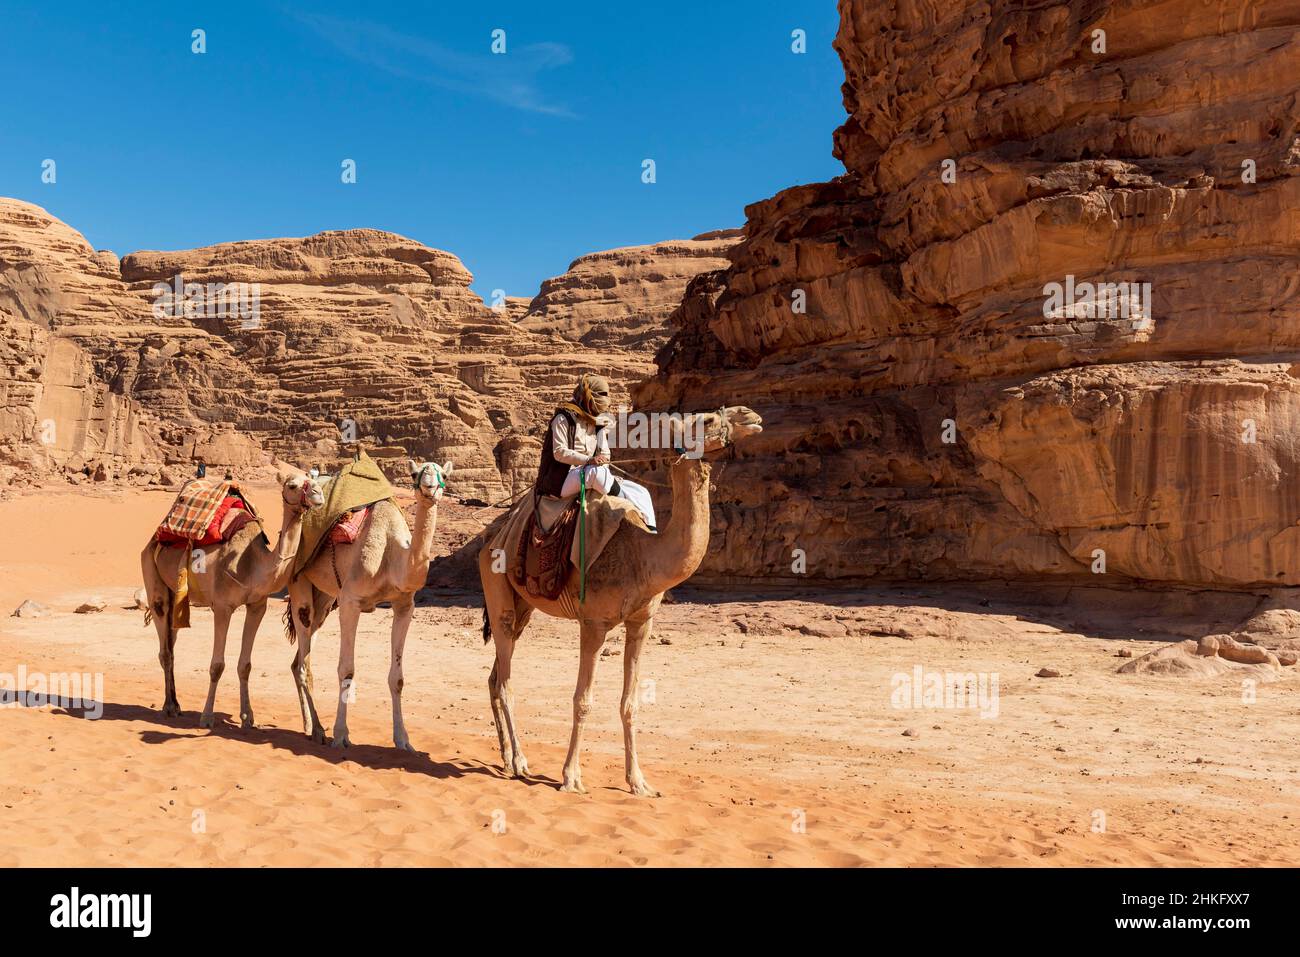 Jordan, Aqaba Governorate, Wadi Rum, listed as World Heritage by UNESCO, desert, mountains, bedouin and his camels Stock Photo